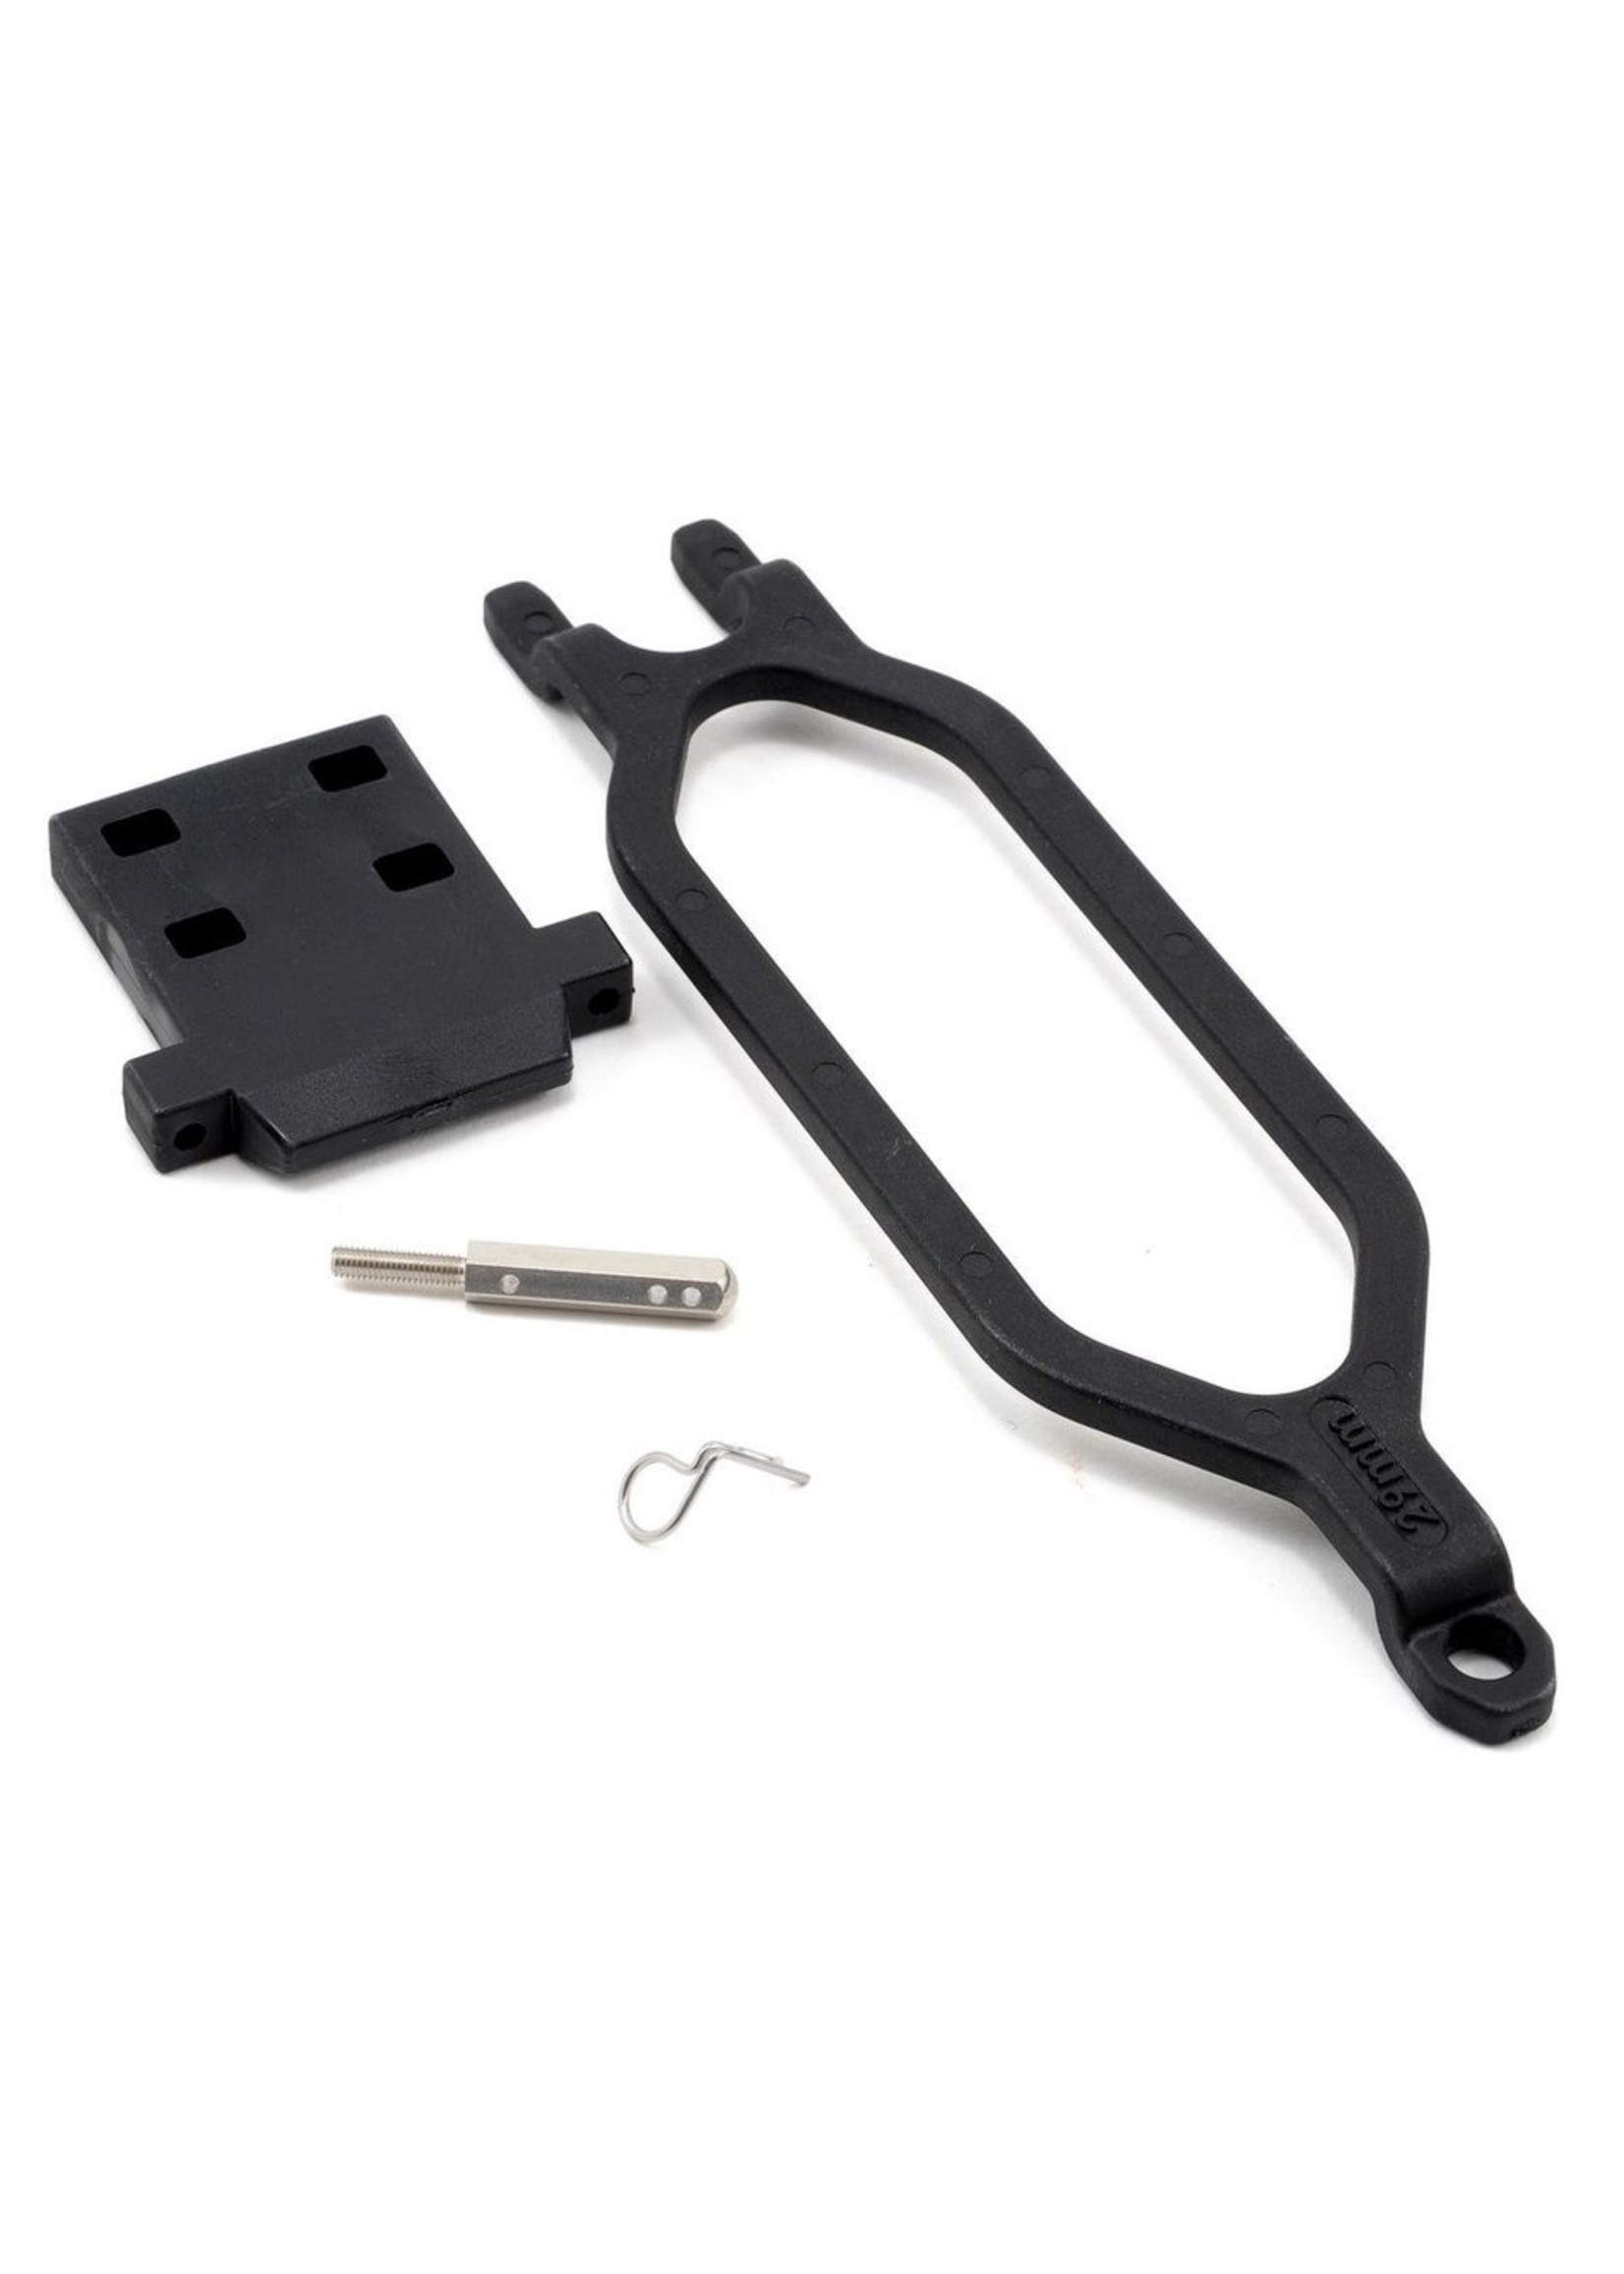 Traxxas TRA6727X Traxxas Hold down, battery/ hold down retainer/ battery post/ angled body clip (allows for installation of taller, multi-cell batteries)